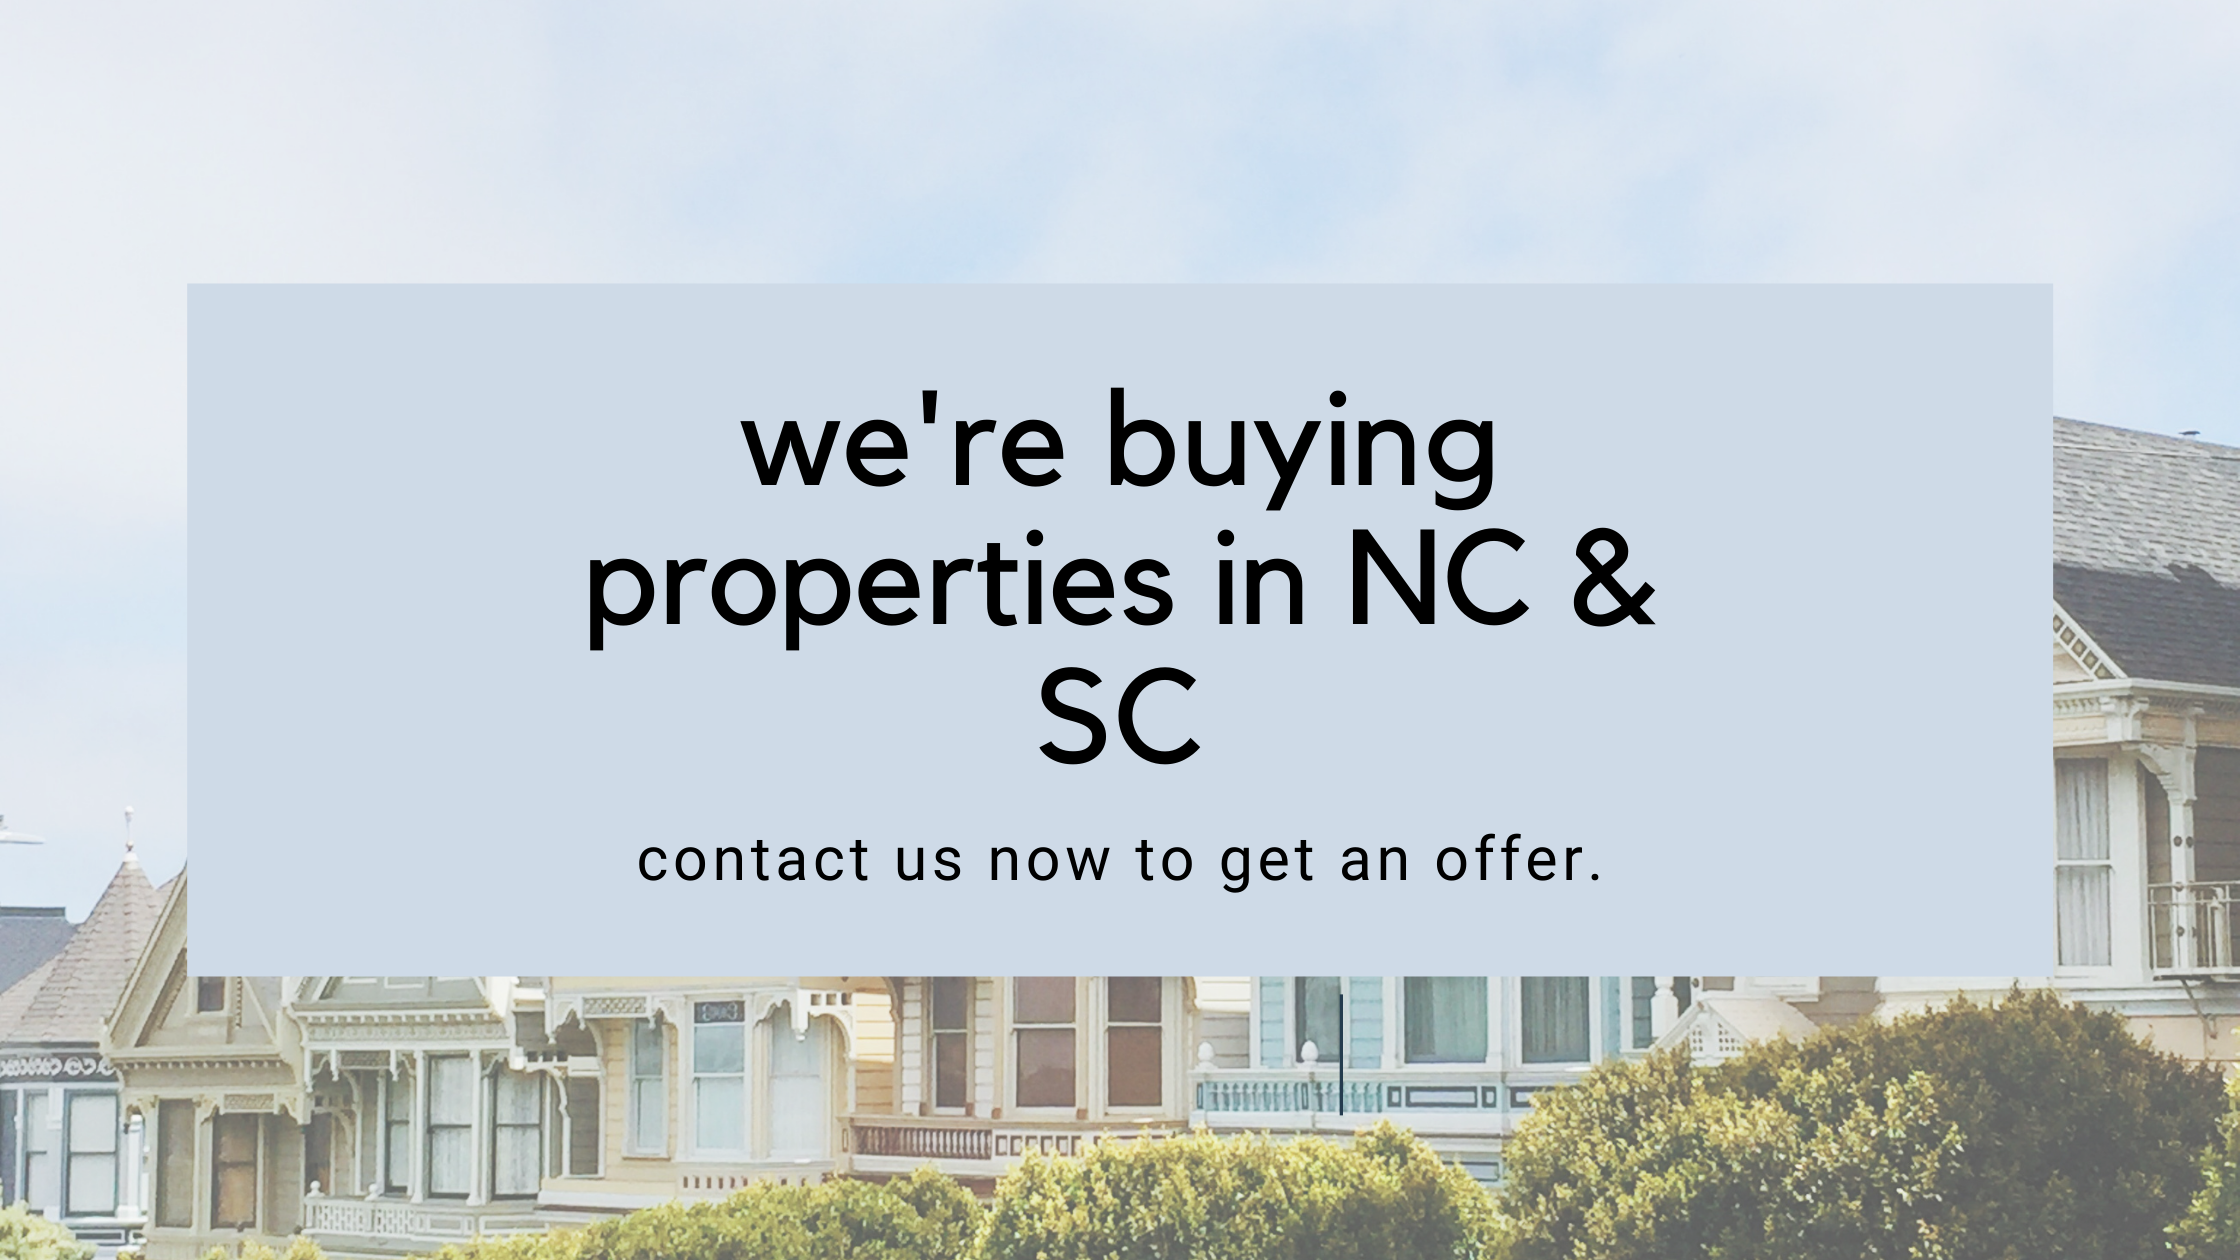 we buy houses in nc and sc